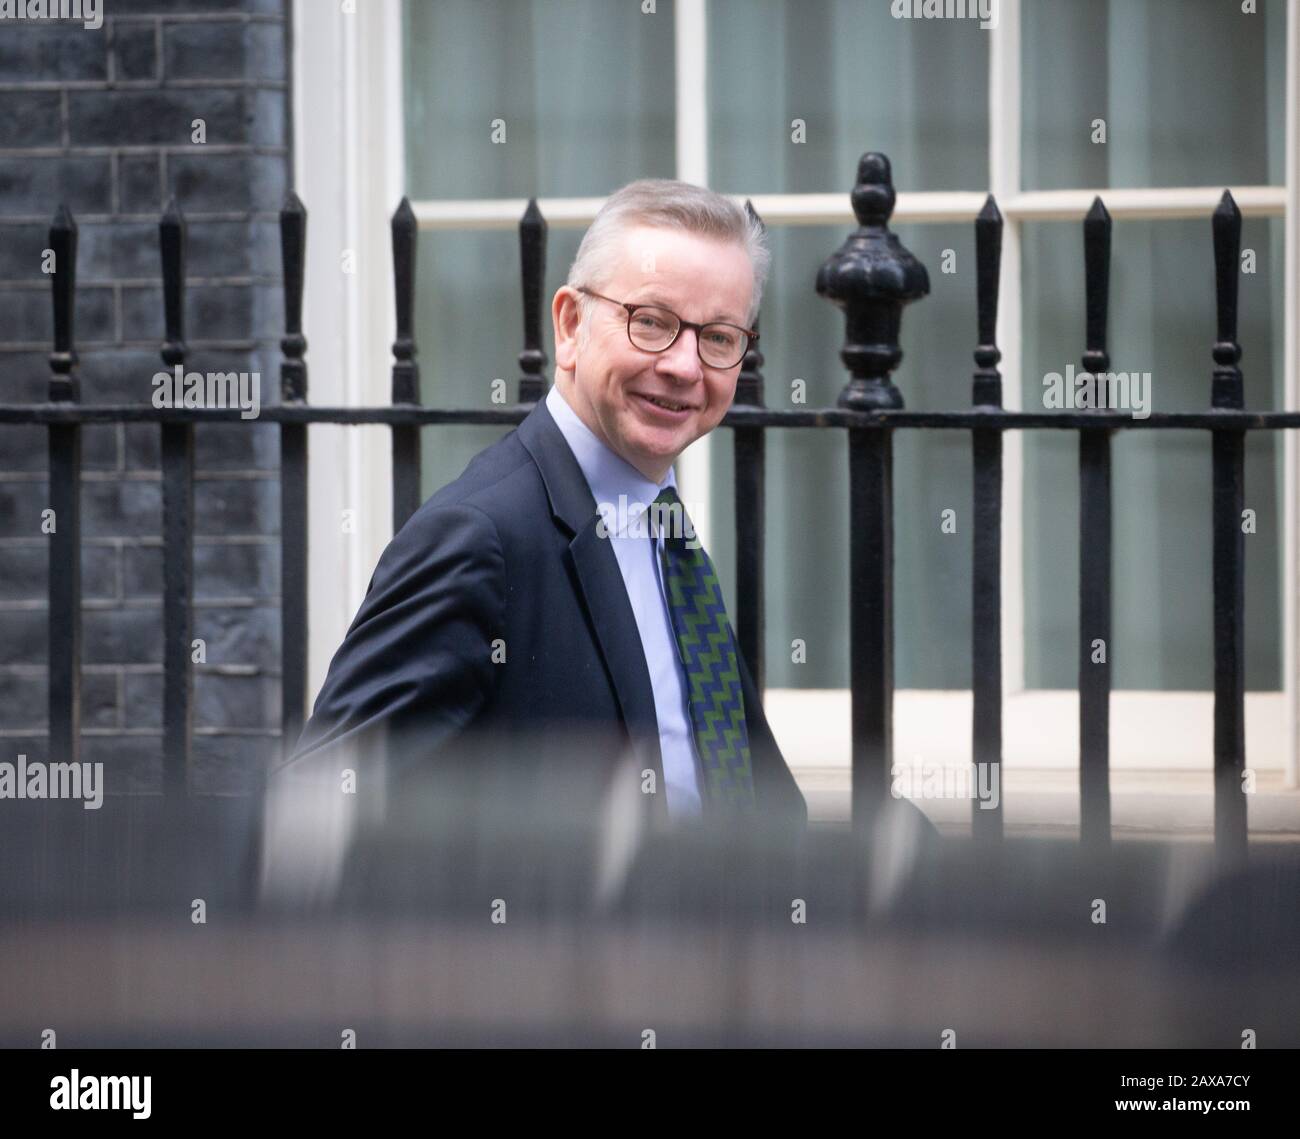 London, UK. 11th Jan, 2020. Michael Gove, Chancellor of the Duchy of Lancaster, arrives for the Cabinet meeting. Credit: Tommy London/Alamy Live News Stock Photo